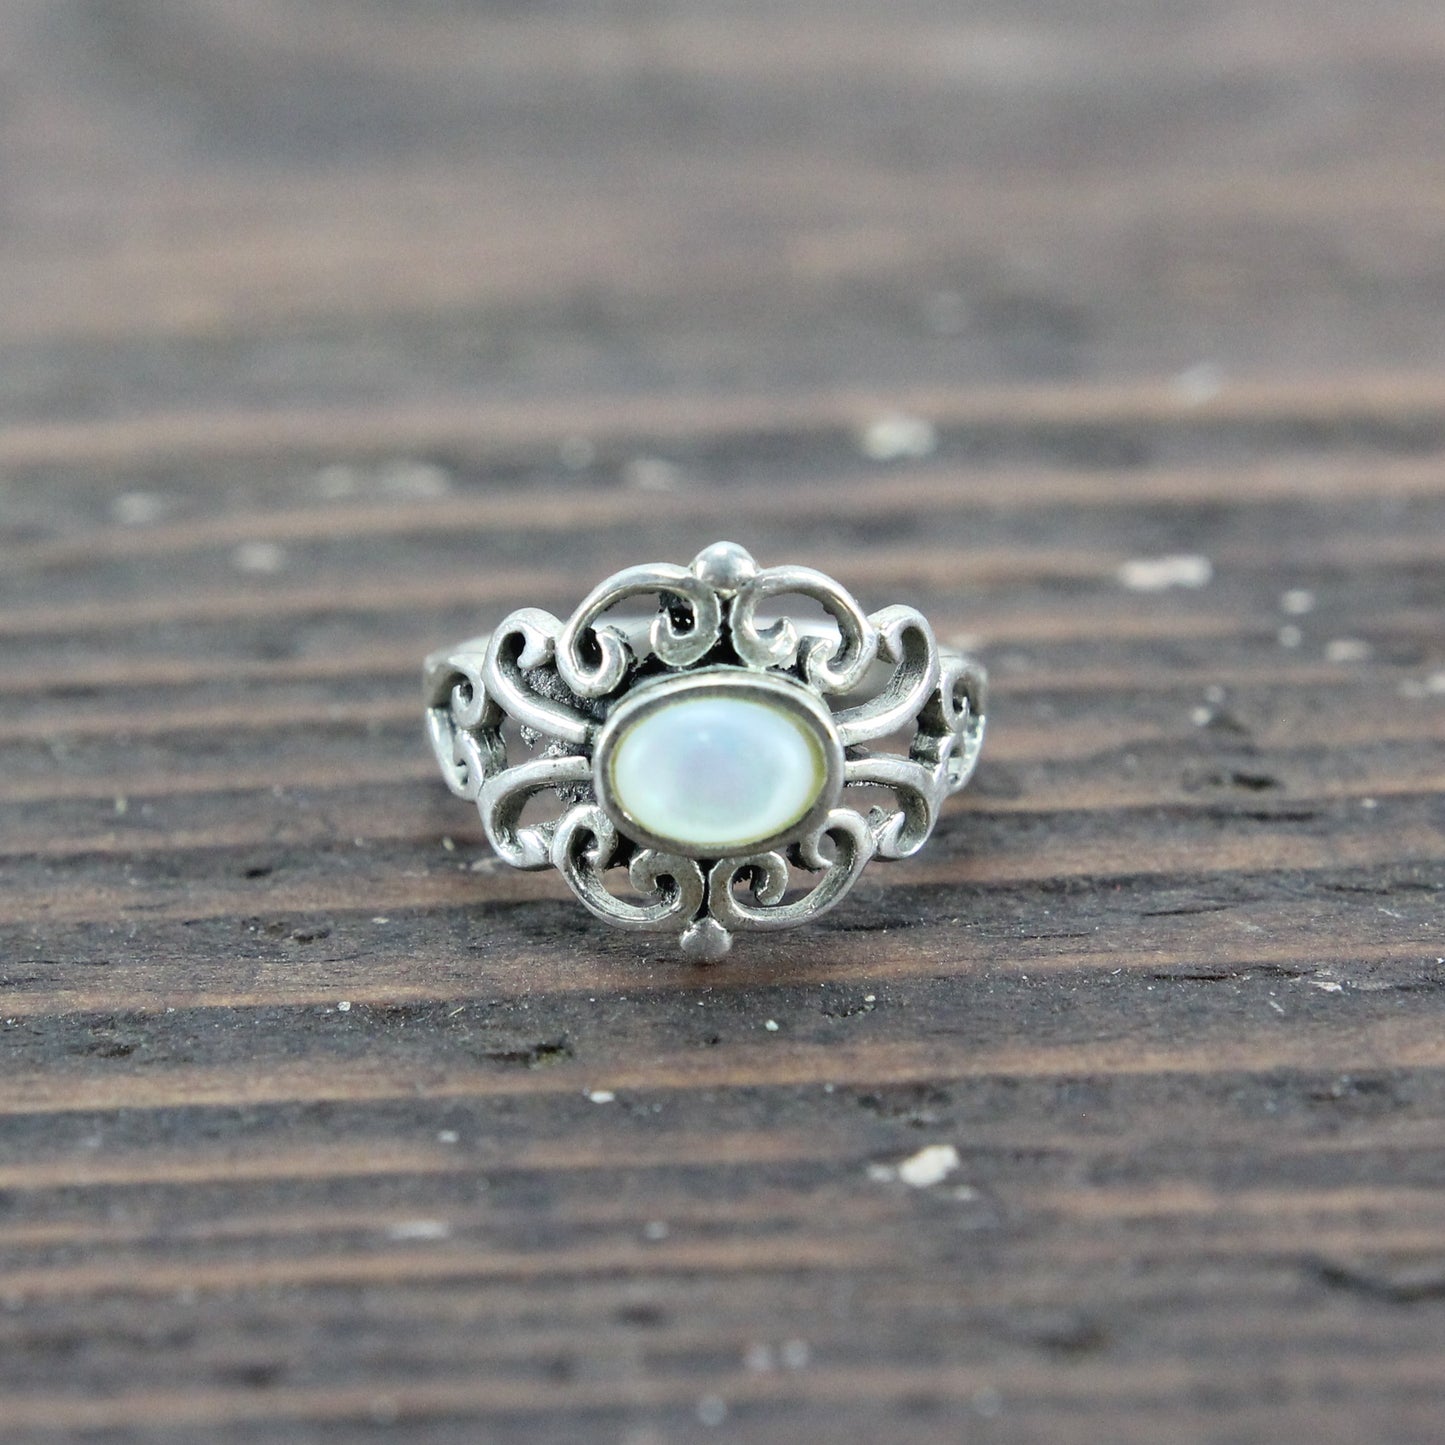 Sterling Silver Ring with White Iridescent Stone - Size 6.5